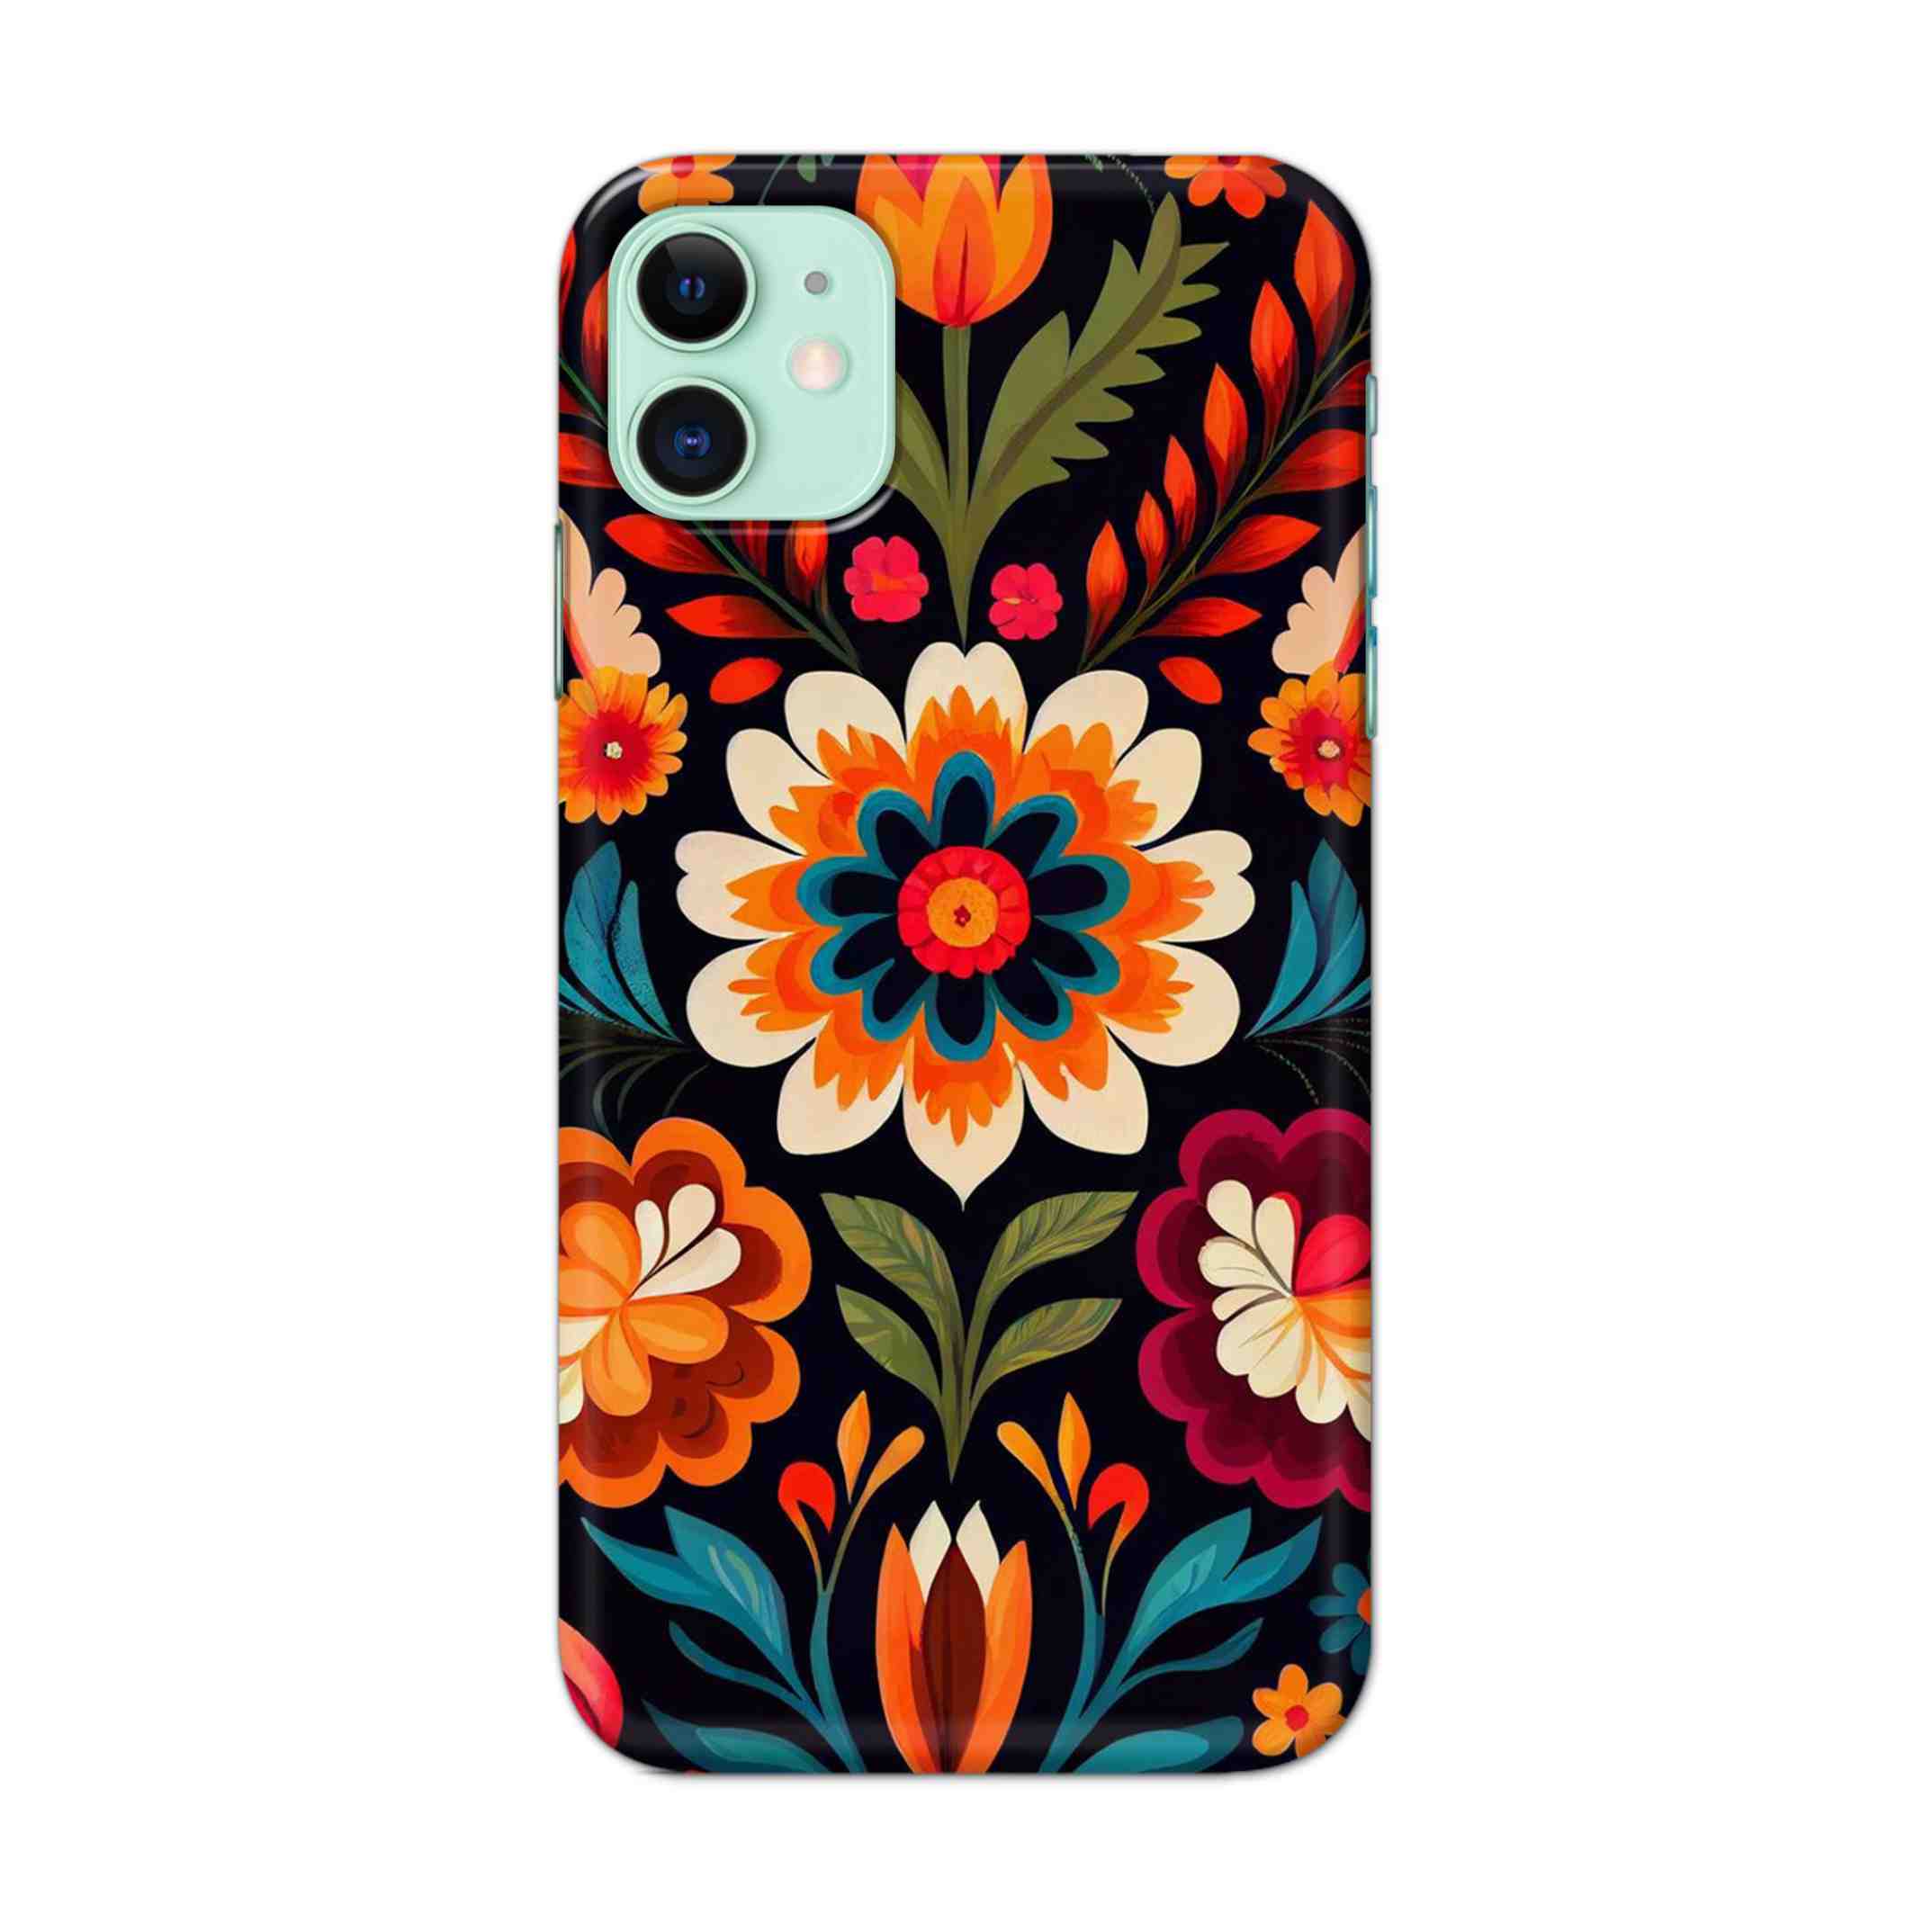 Buy Flower Hard Back Mobile Phone Case/Cover For iPhone 11 Online